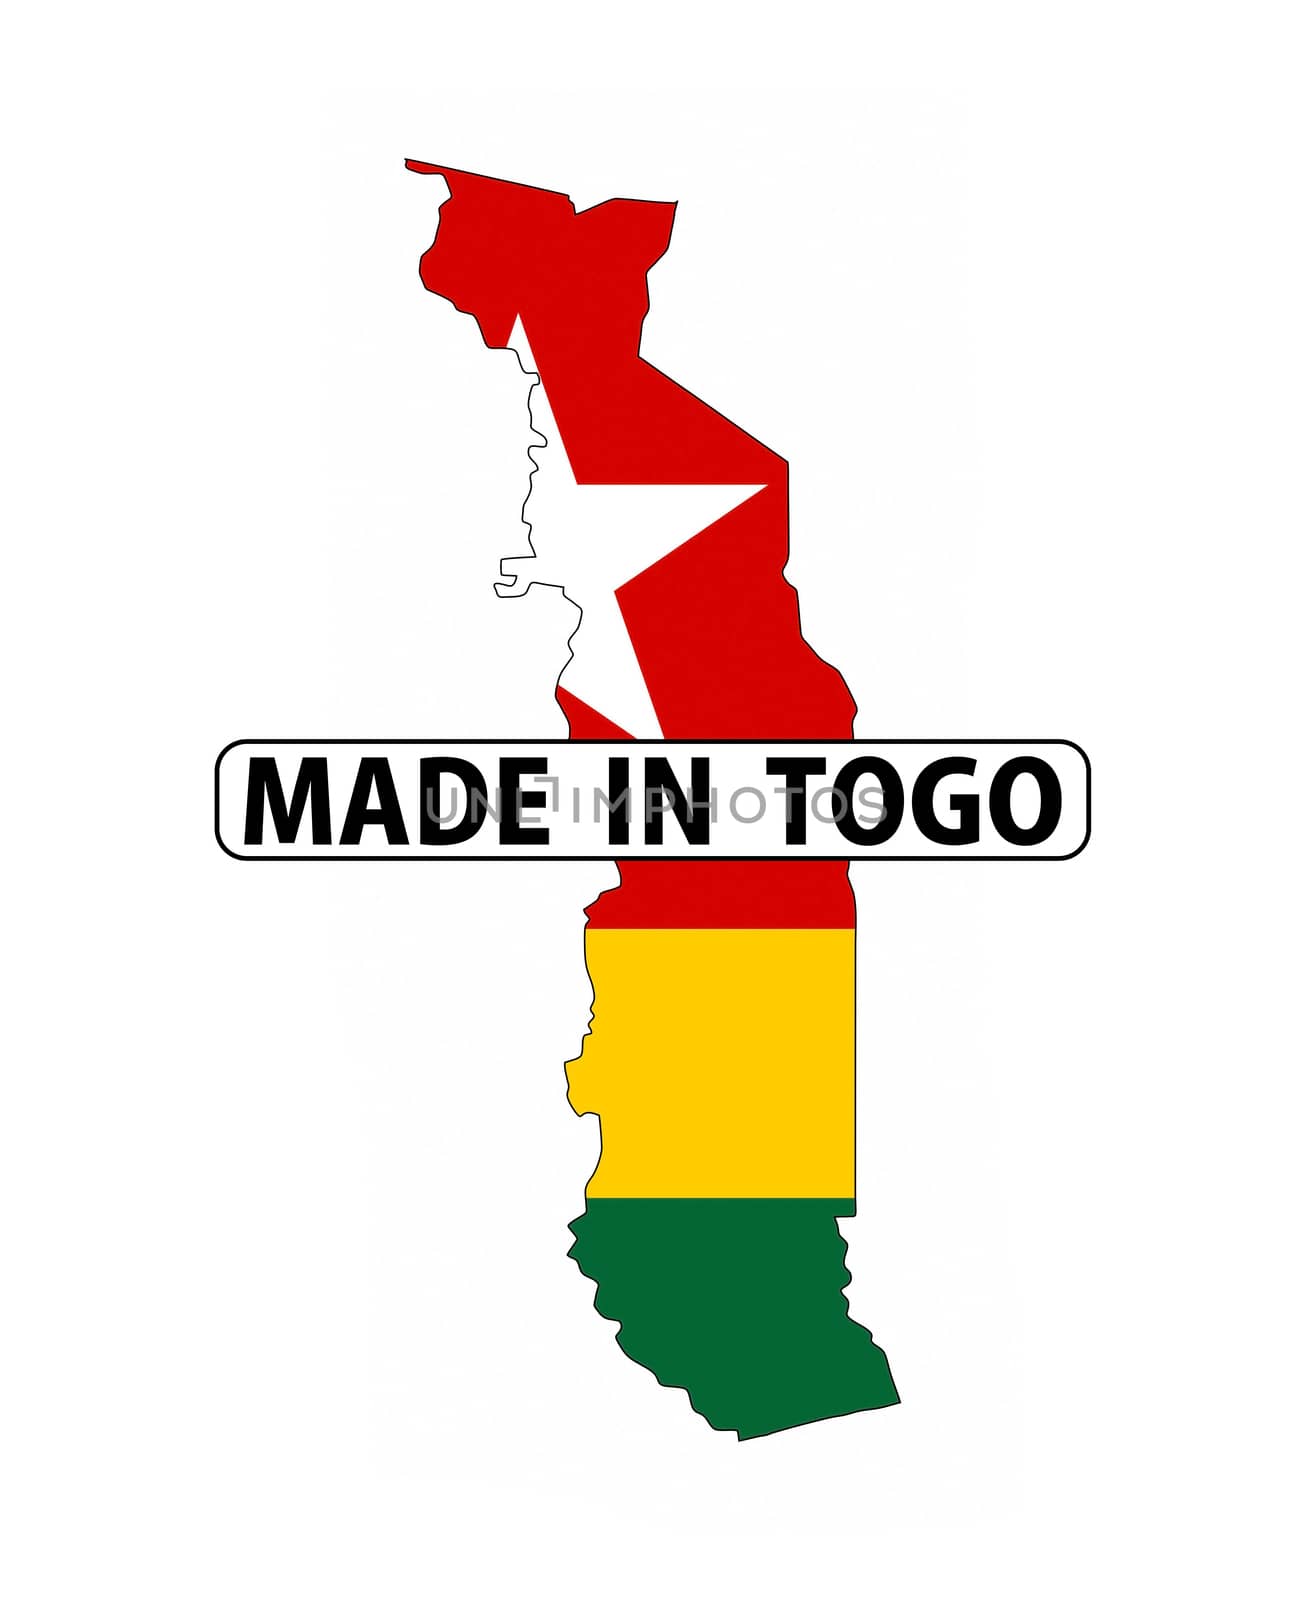 made in togo by tony4urban